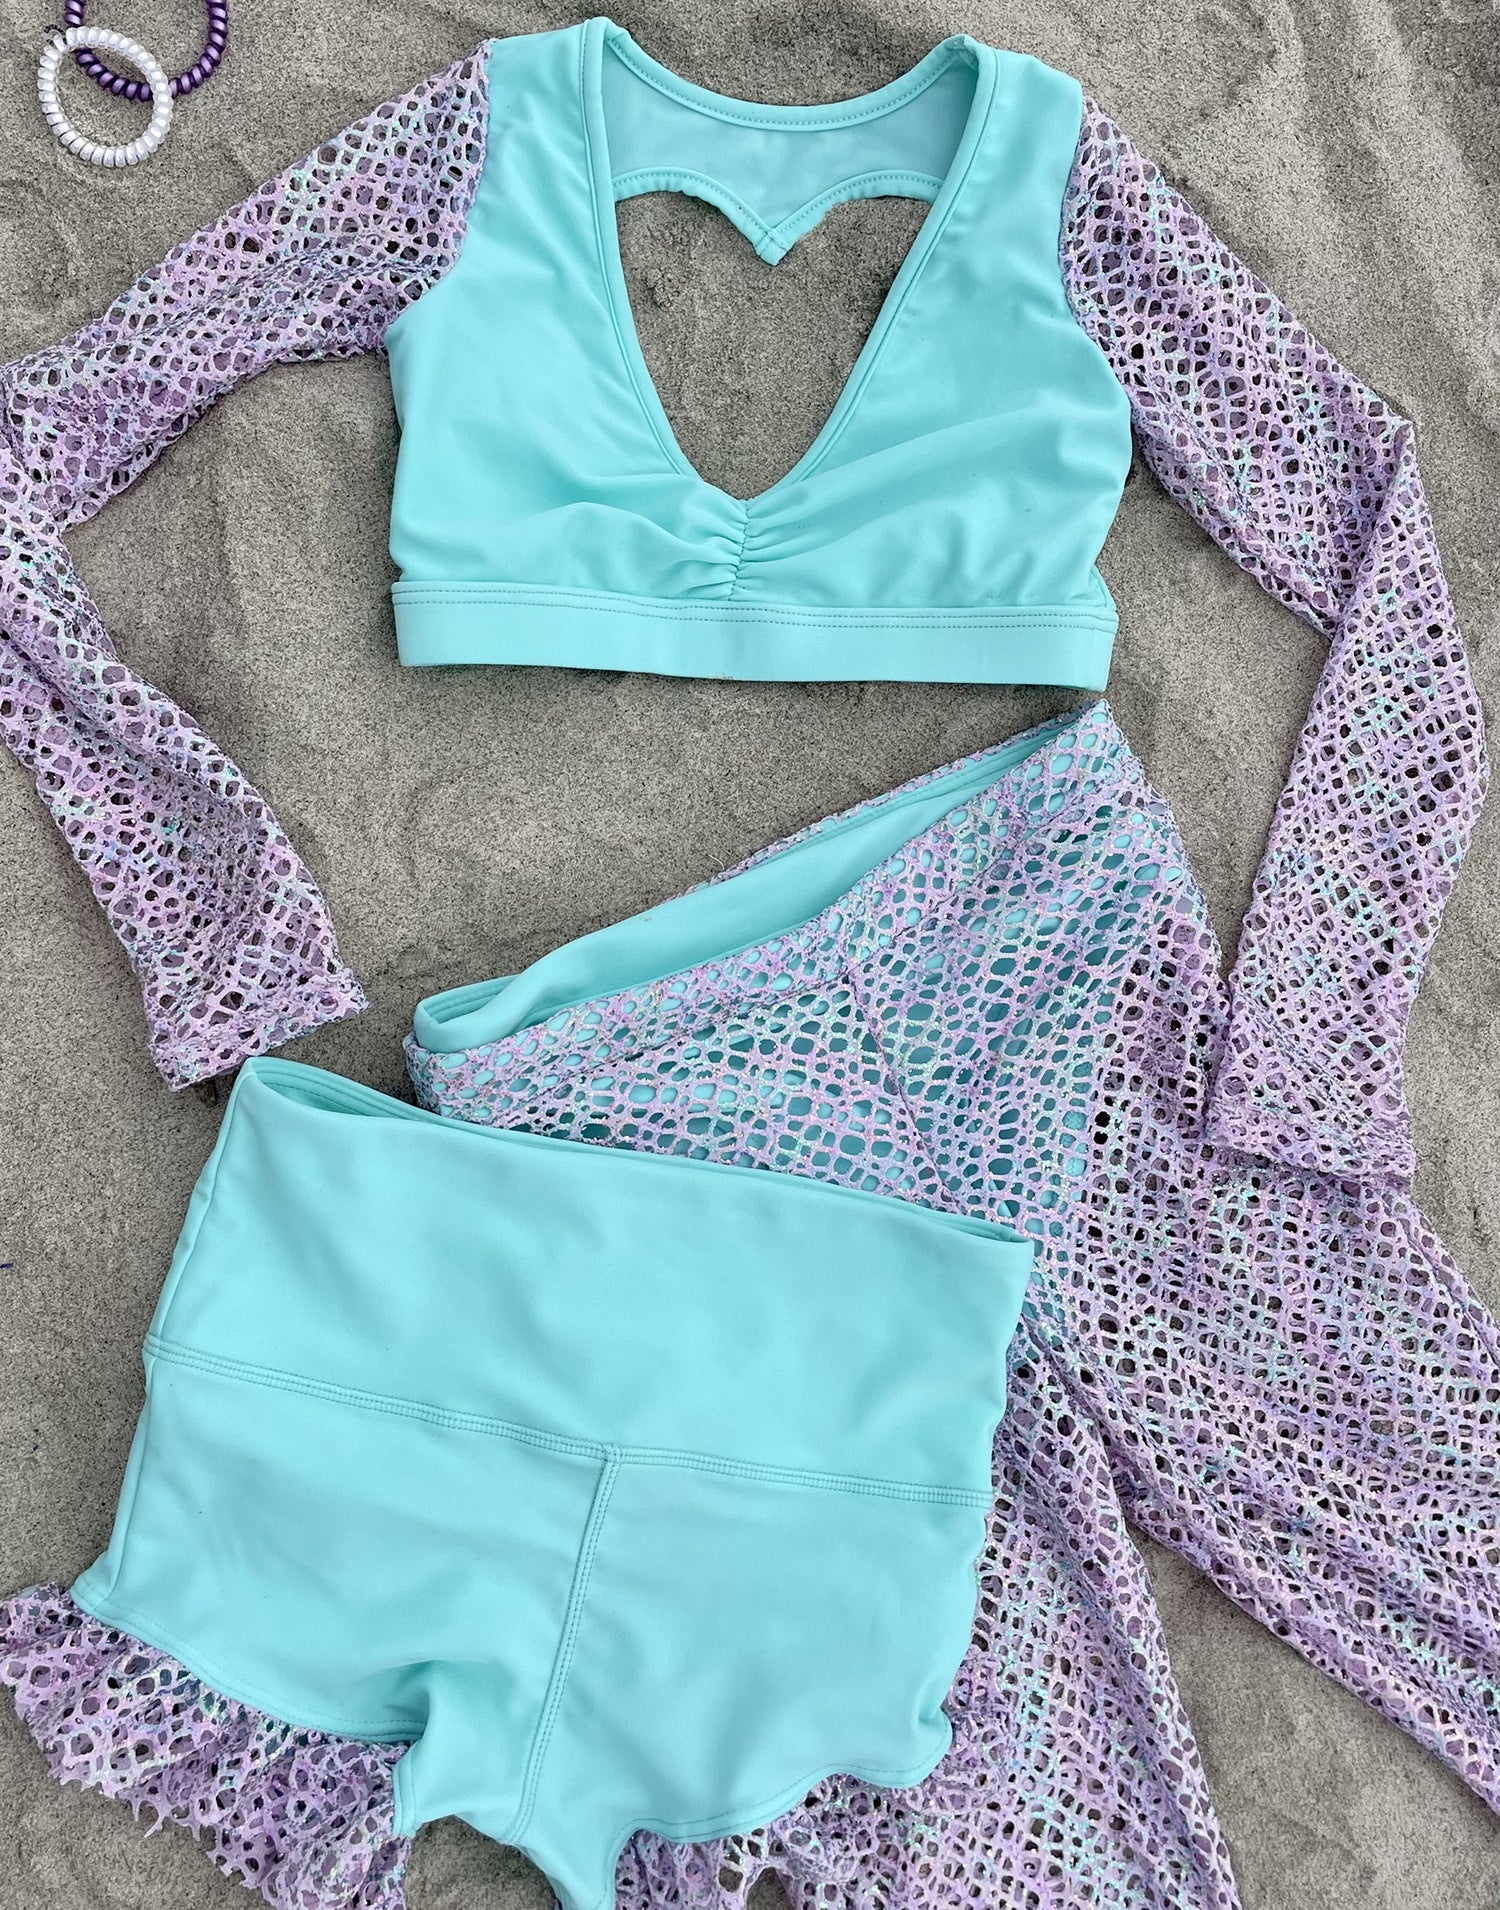 Dallas Active Top in Aqua with Wide Net Mesh Long Sleeves - Product View